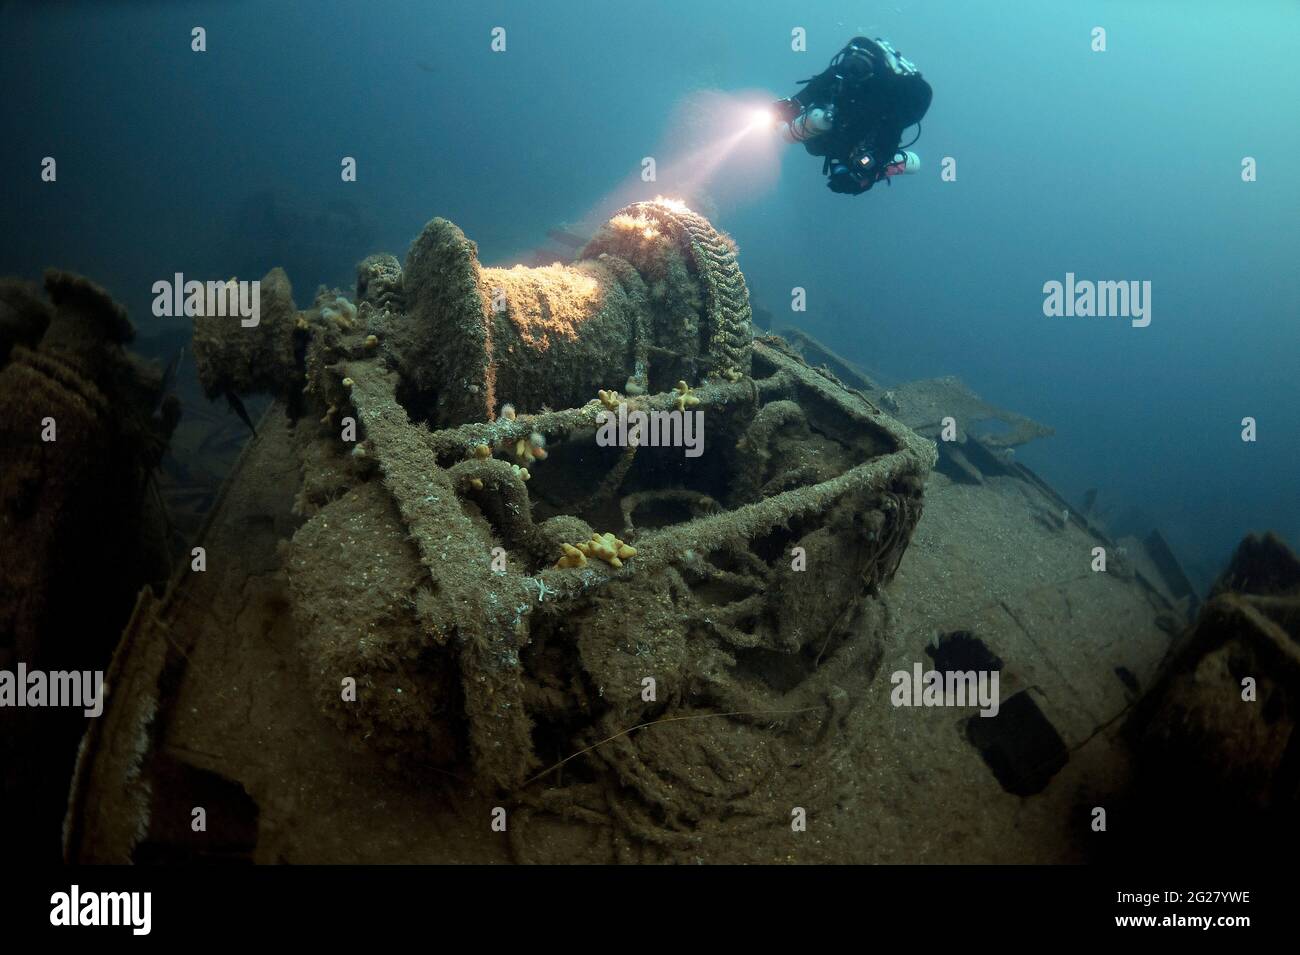 Diver exploring the SS Empire Heritage shipwreck, shown above the winch. Stock Photo